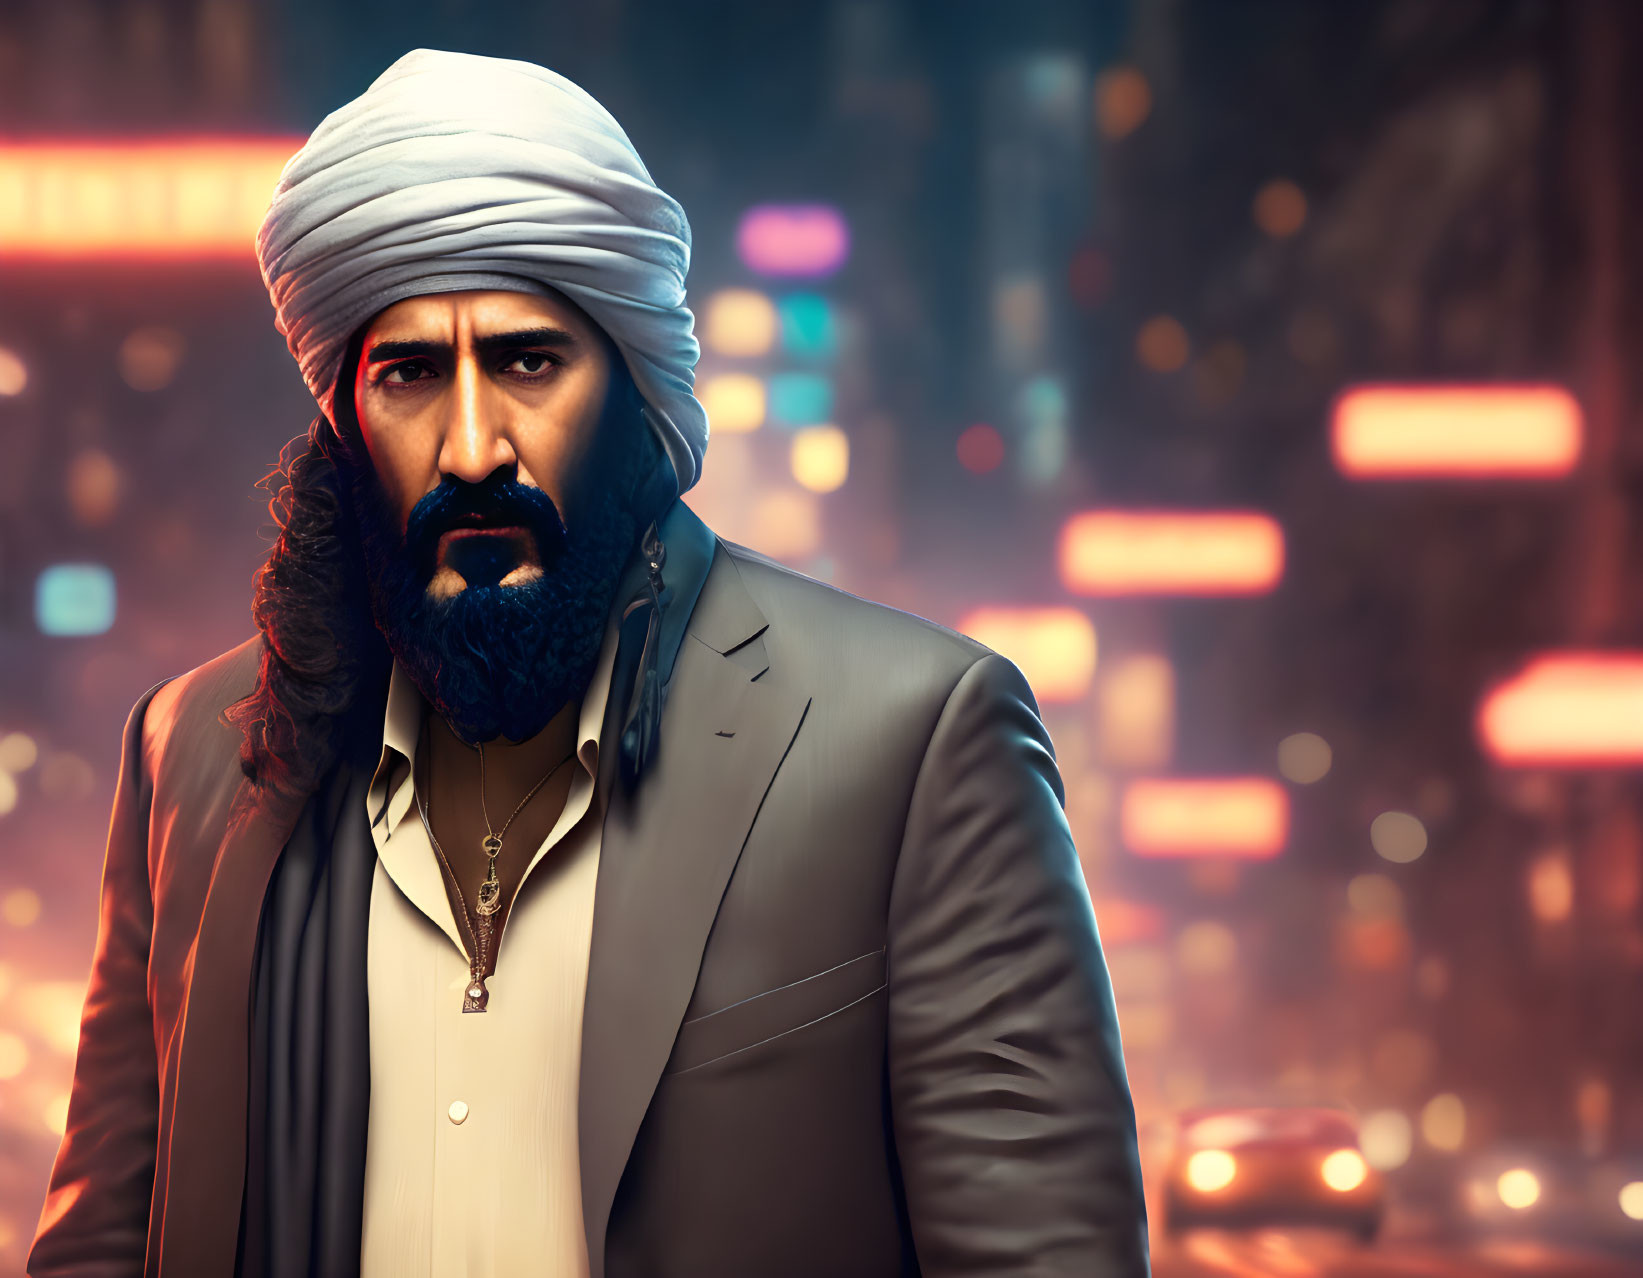 Bearded man in white turban against city nightscape